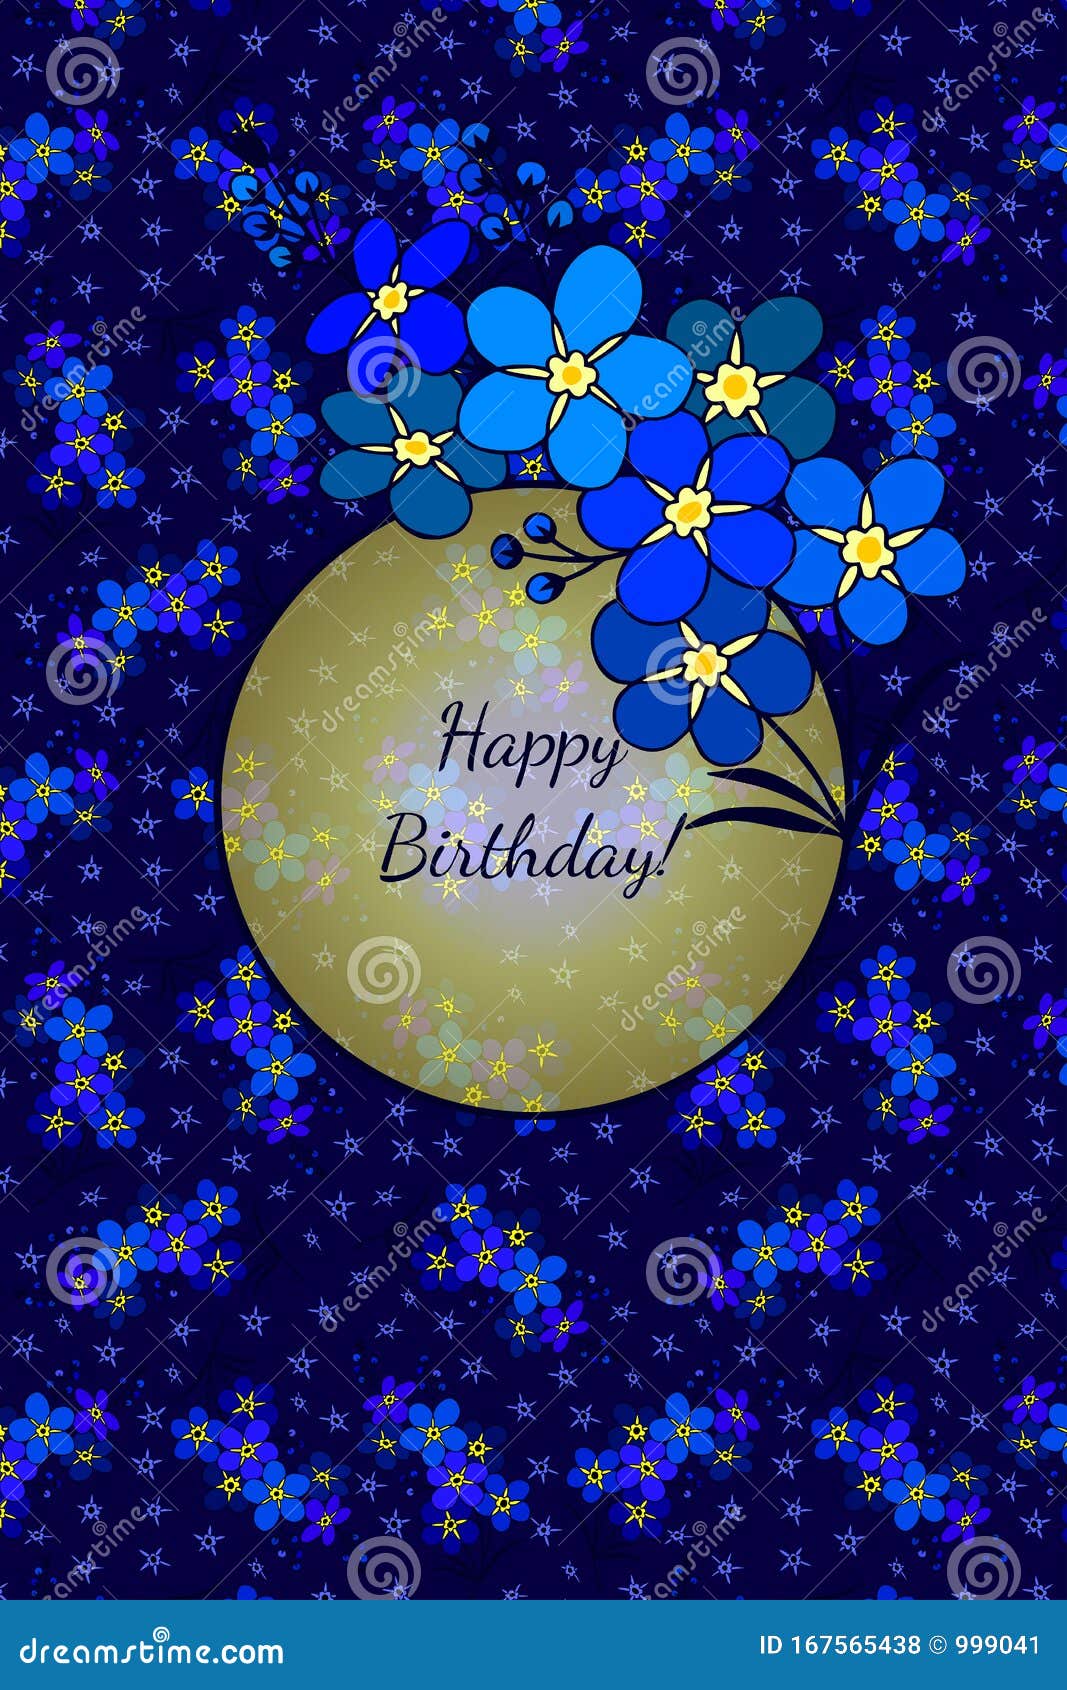 Happy Birthday! - Card. Frame with Forget-me-not Flowers. Eps 10 ...